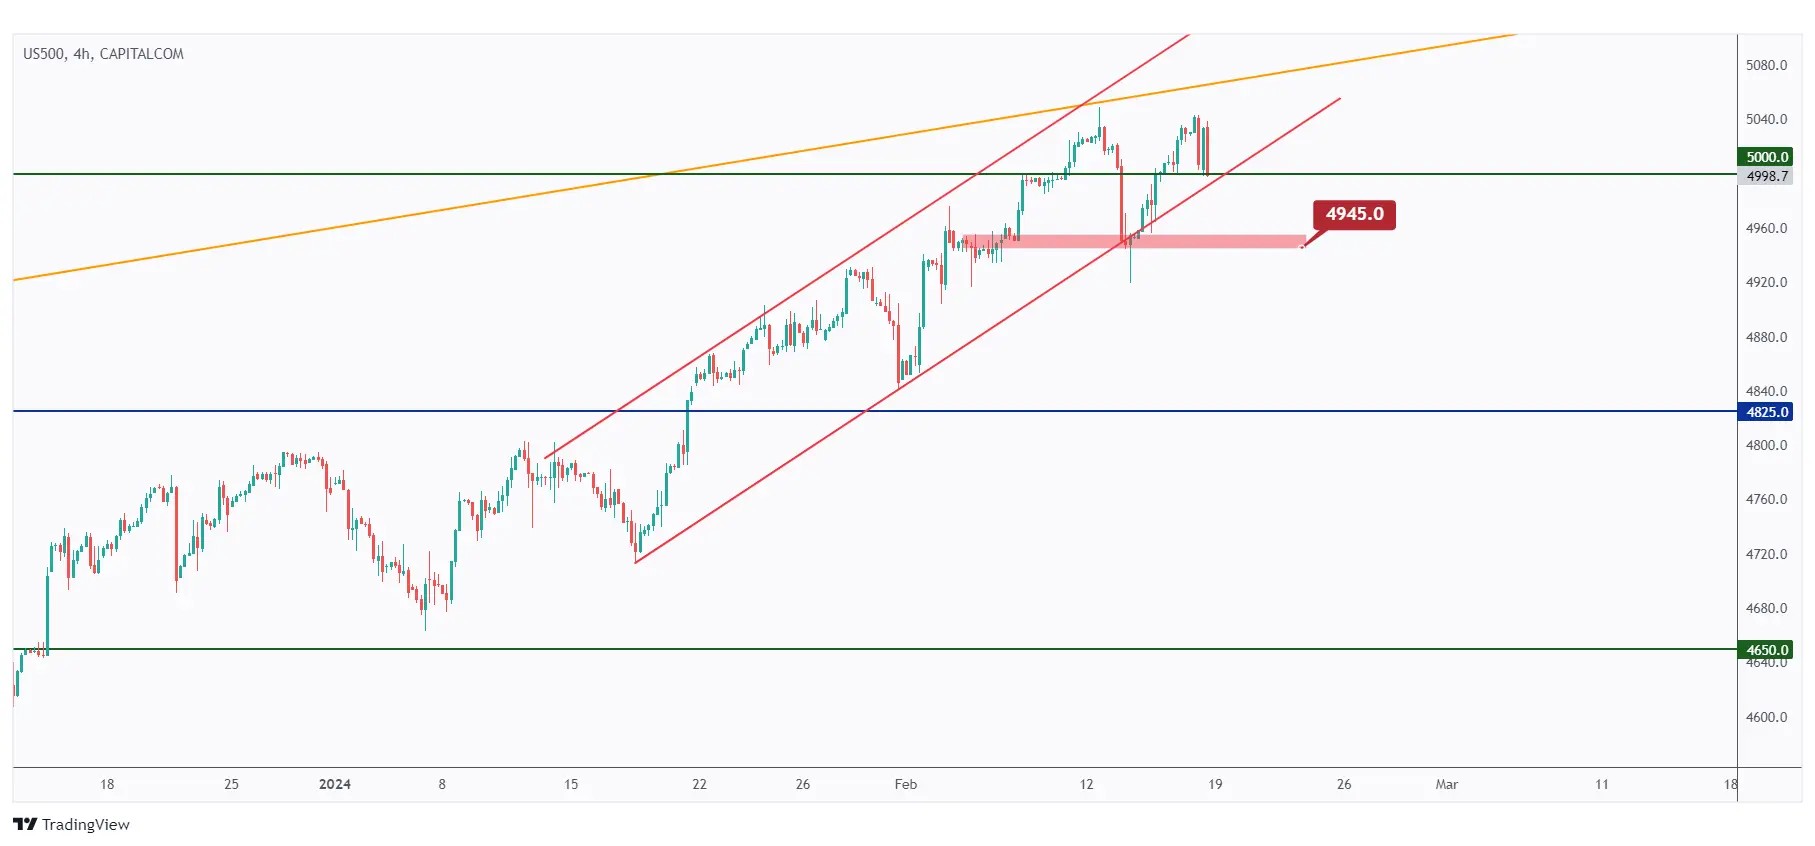 US500 4h chart overall bullish trading inside the rising channel in red.